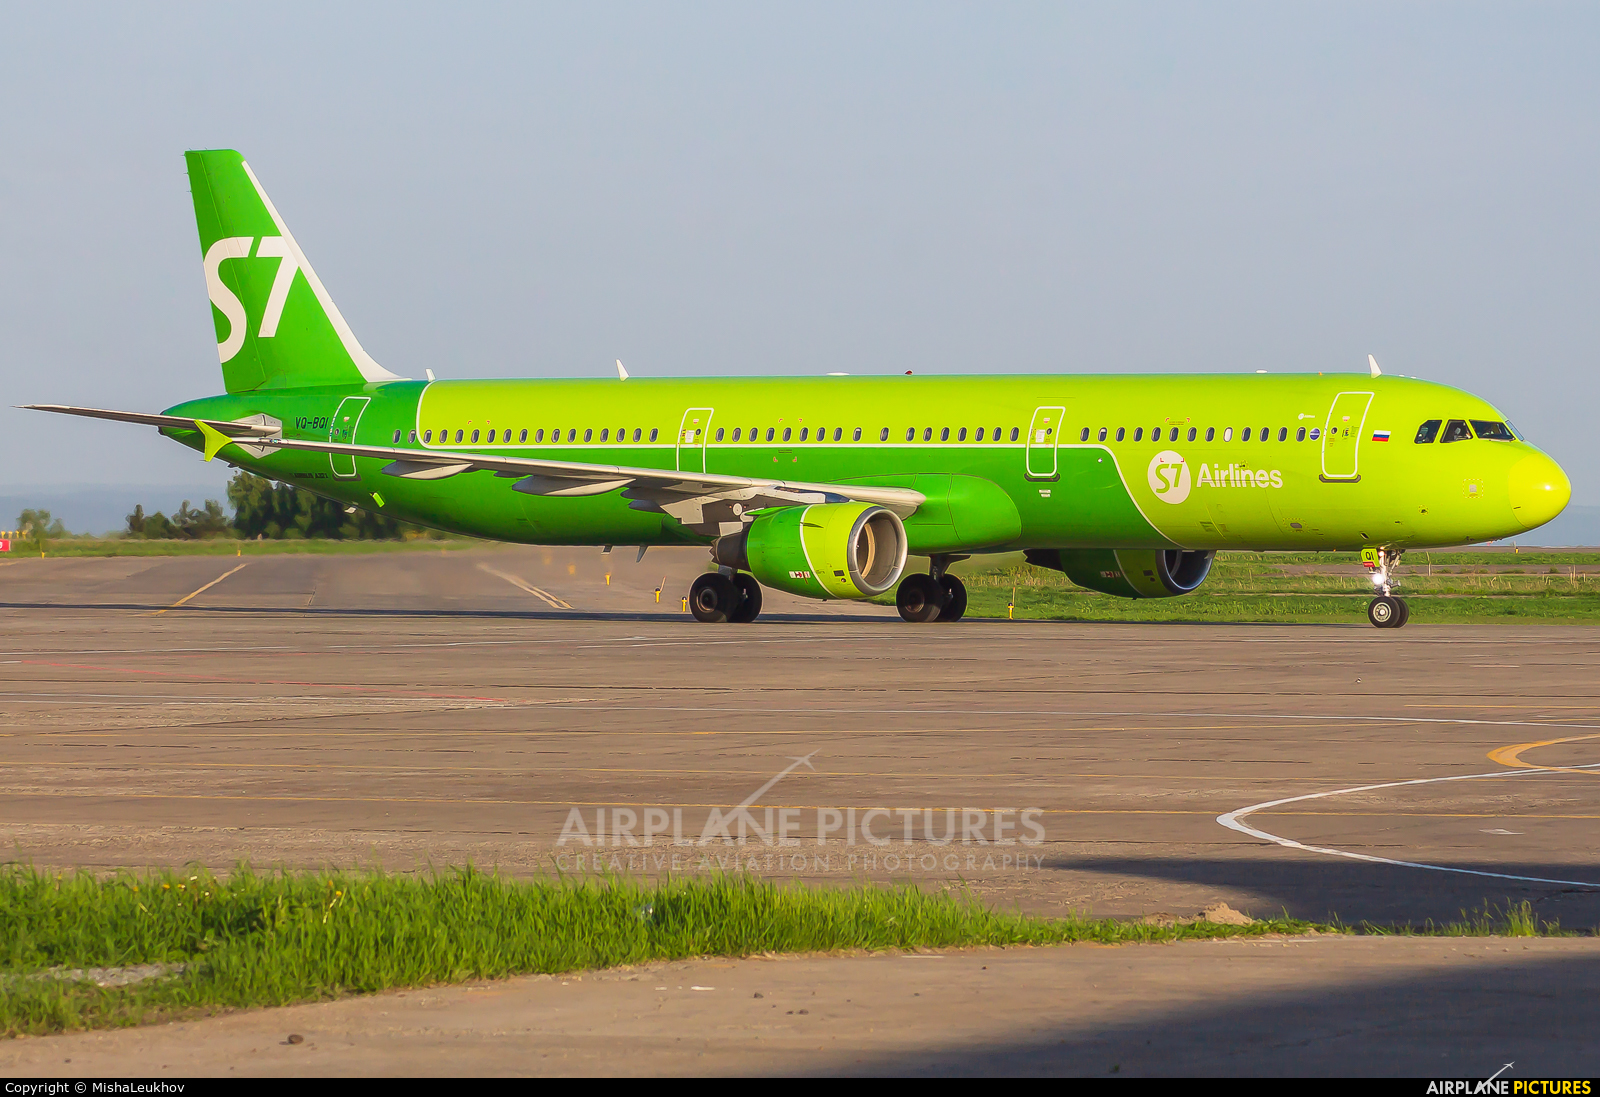 S7 Airlines VQ-BQI aircraft at Kemerovo